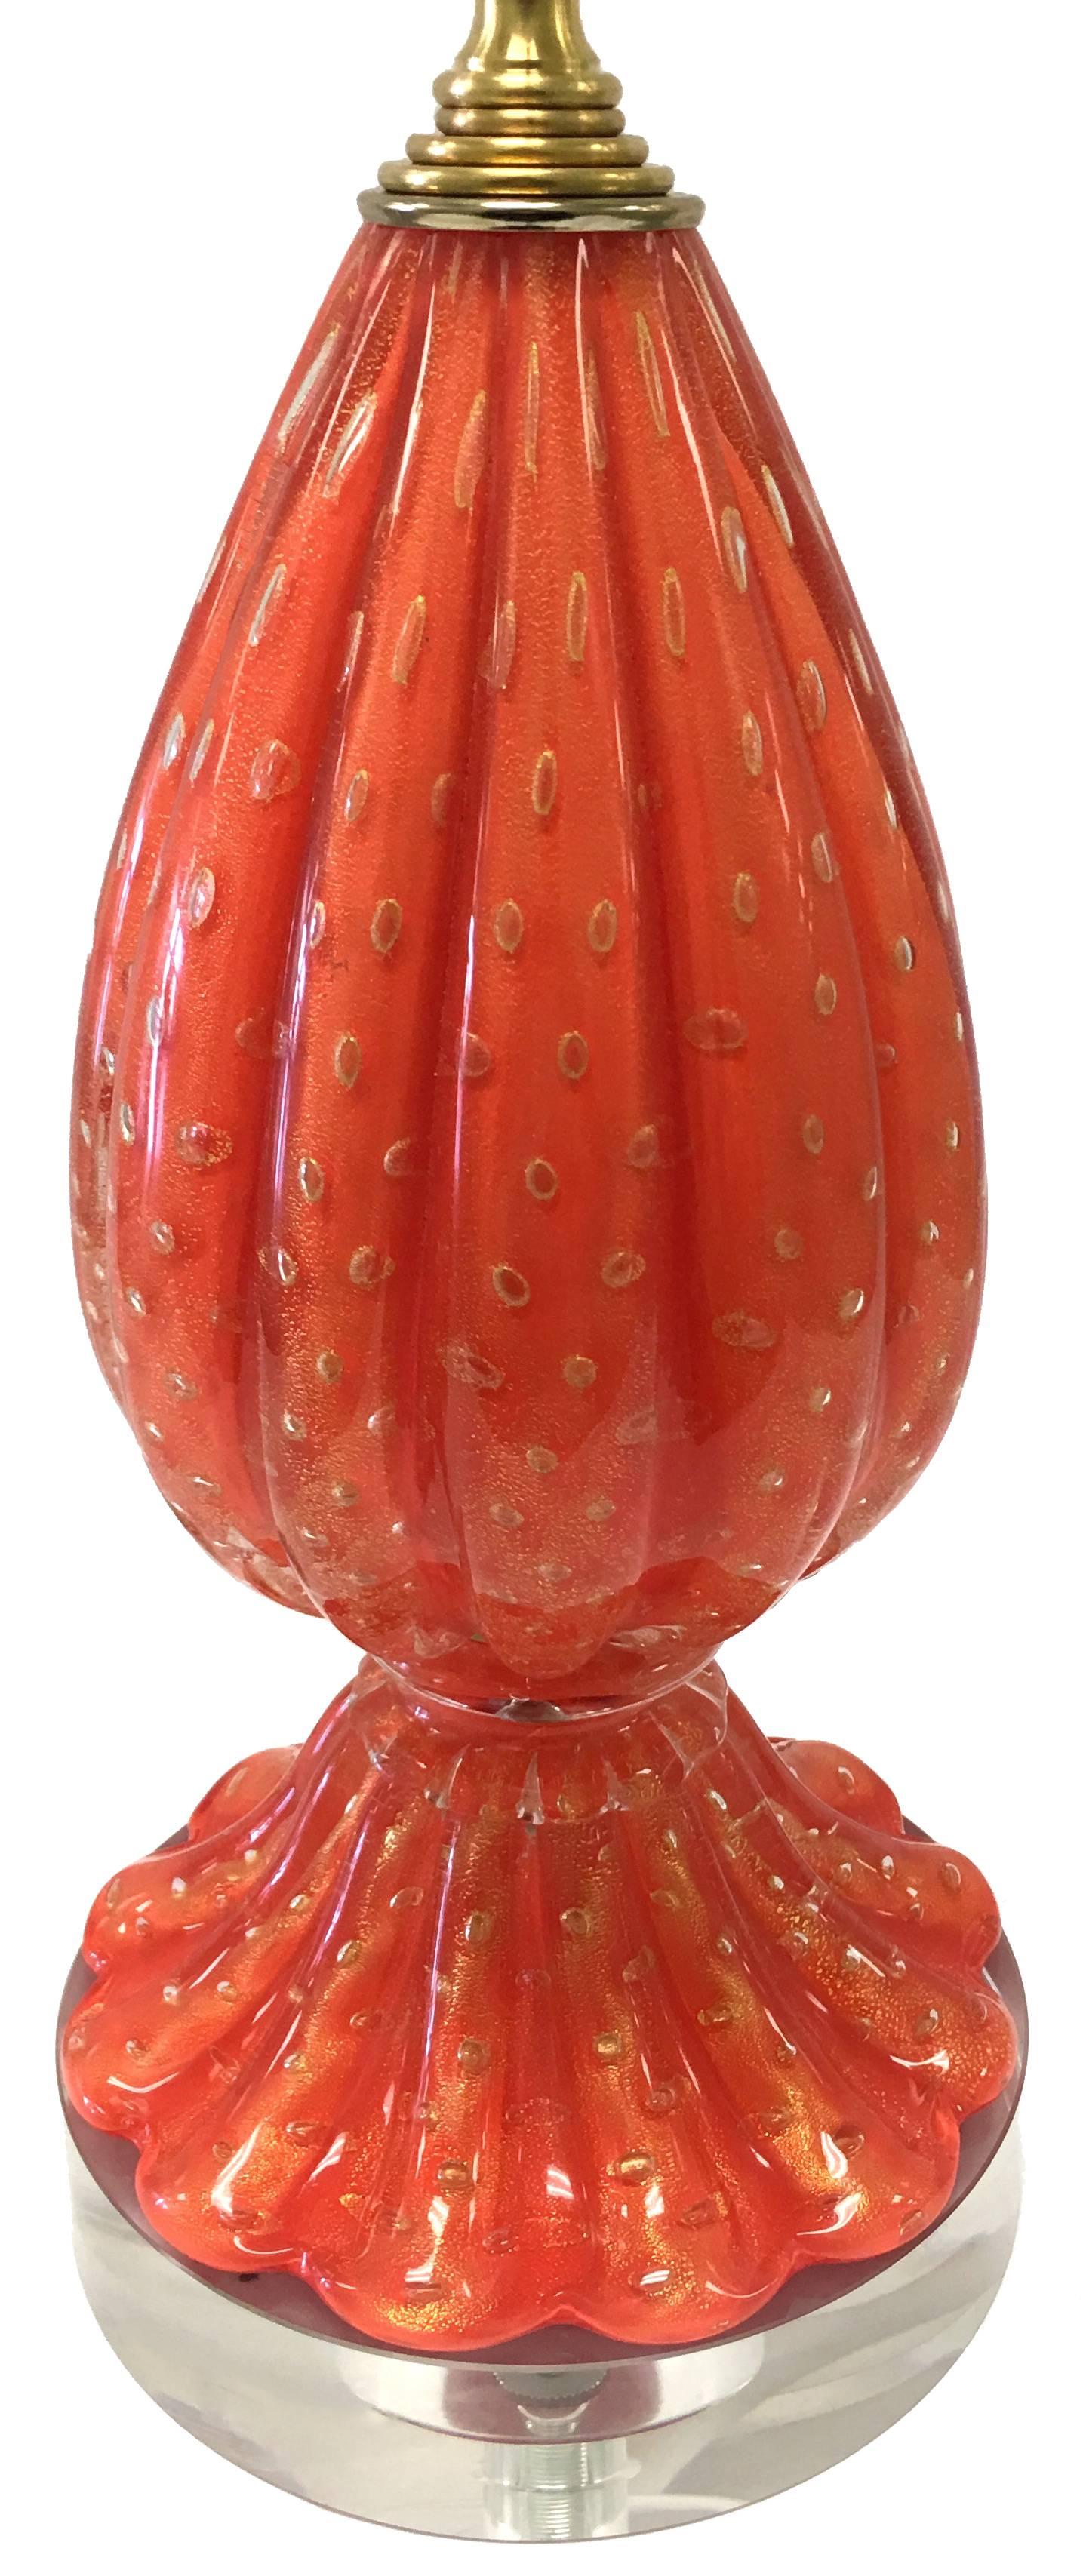 Barovier and Toso Murano Orange Glass Lamp In Good Condition For Sale In Stamford, CT